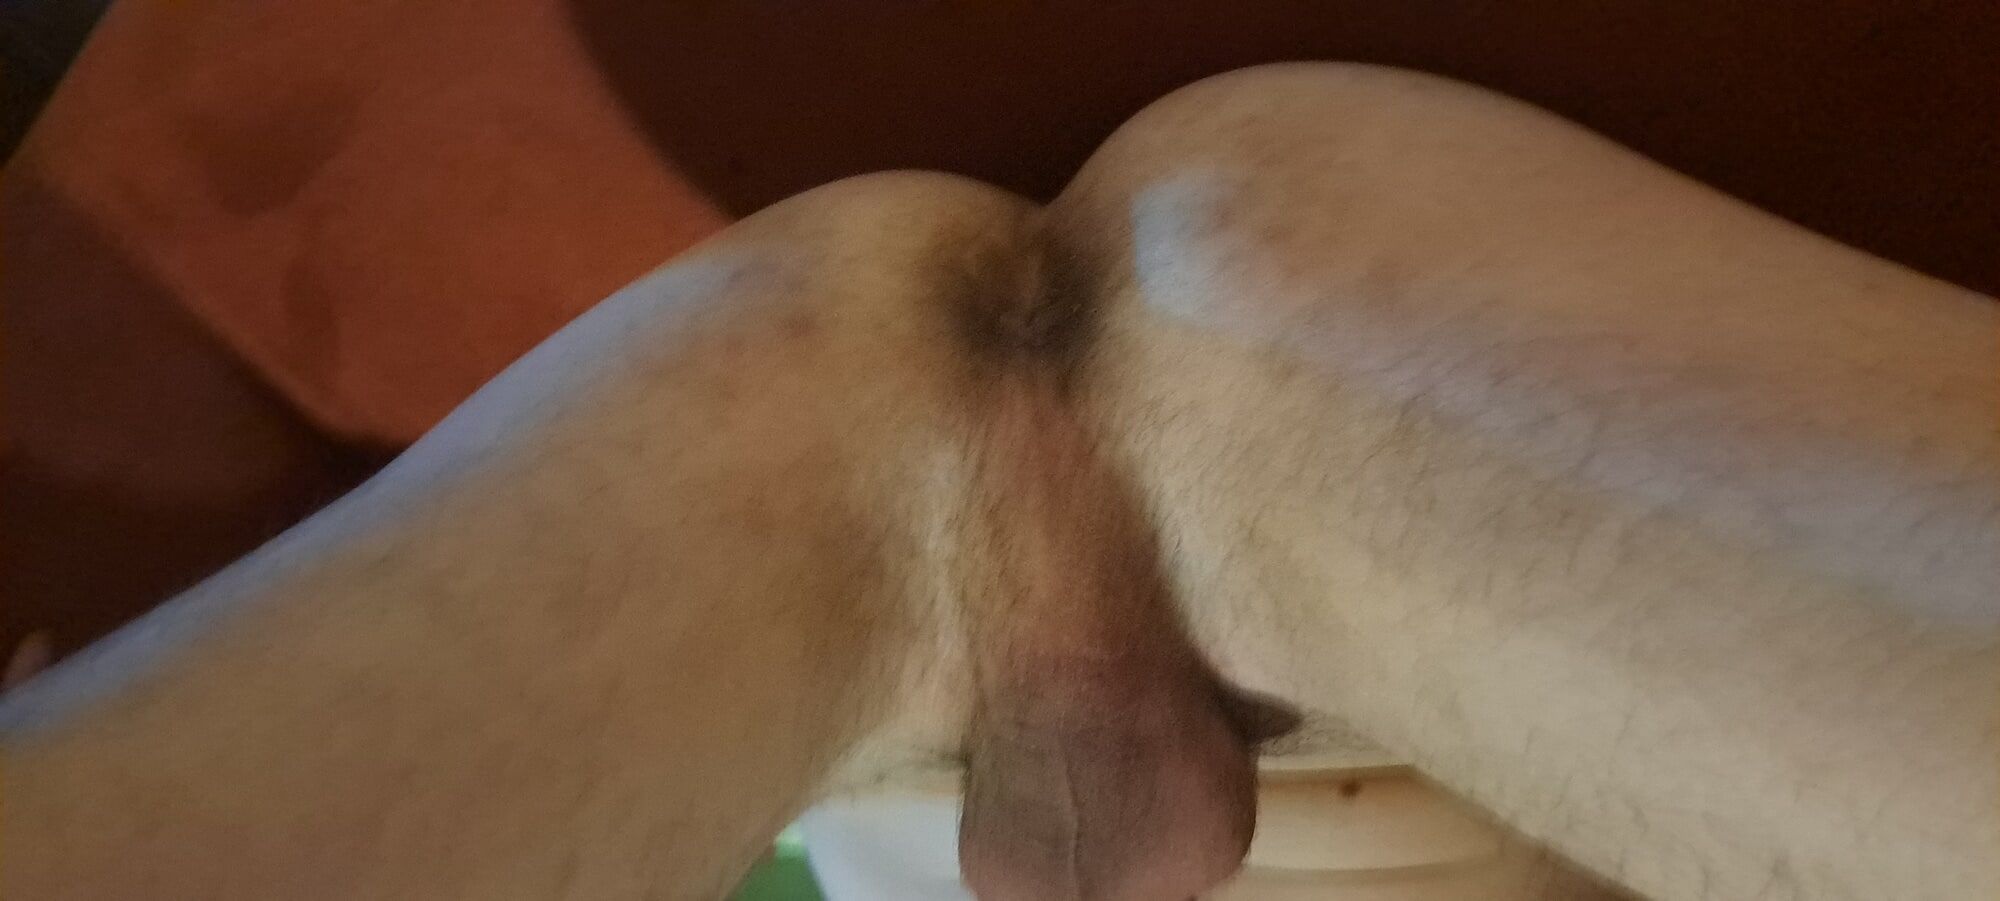 My Cock! #6